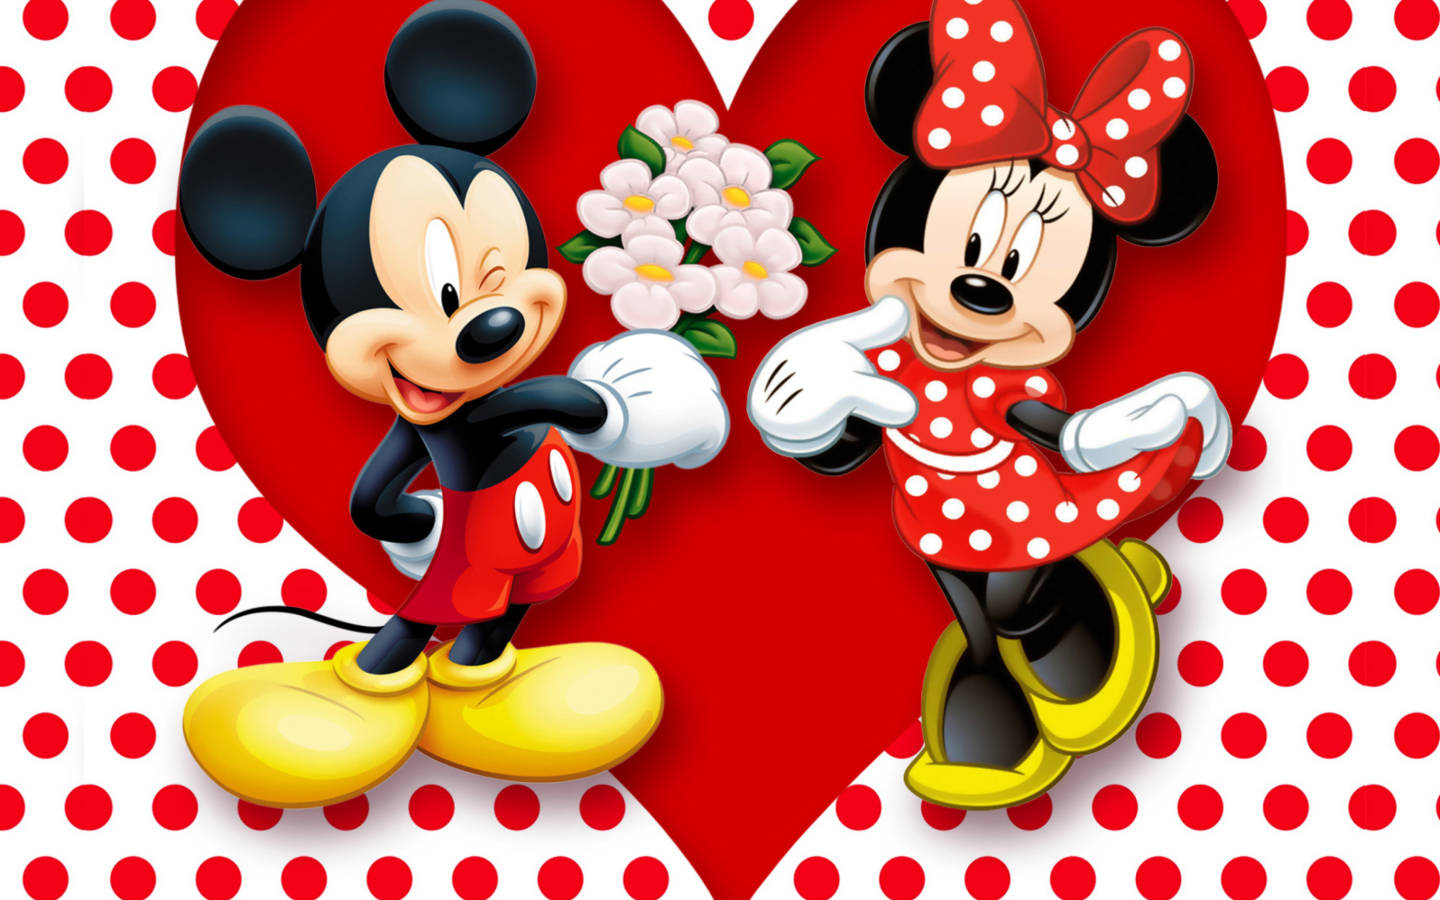 Mickey And Minnie Mouse wallpaper 1440x900